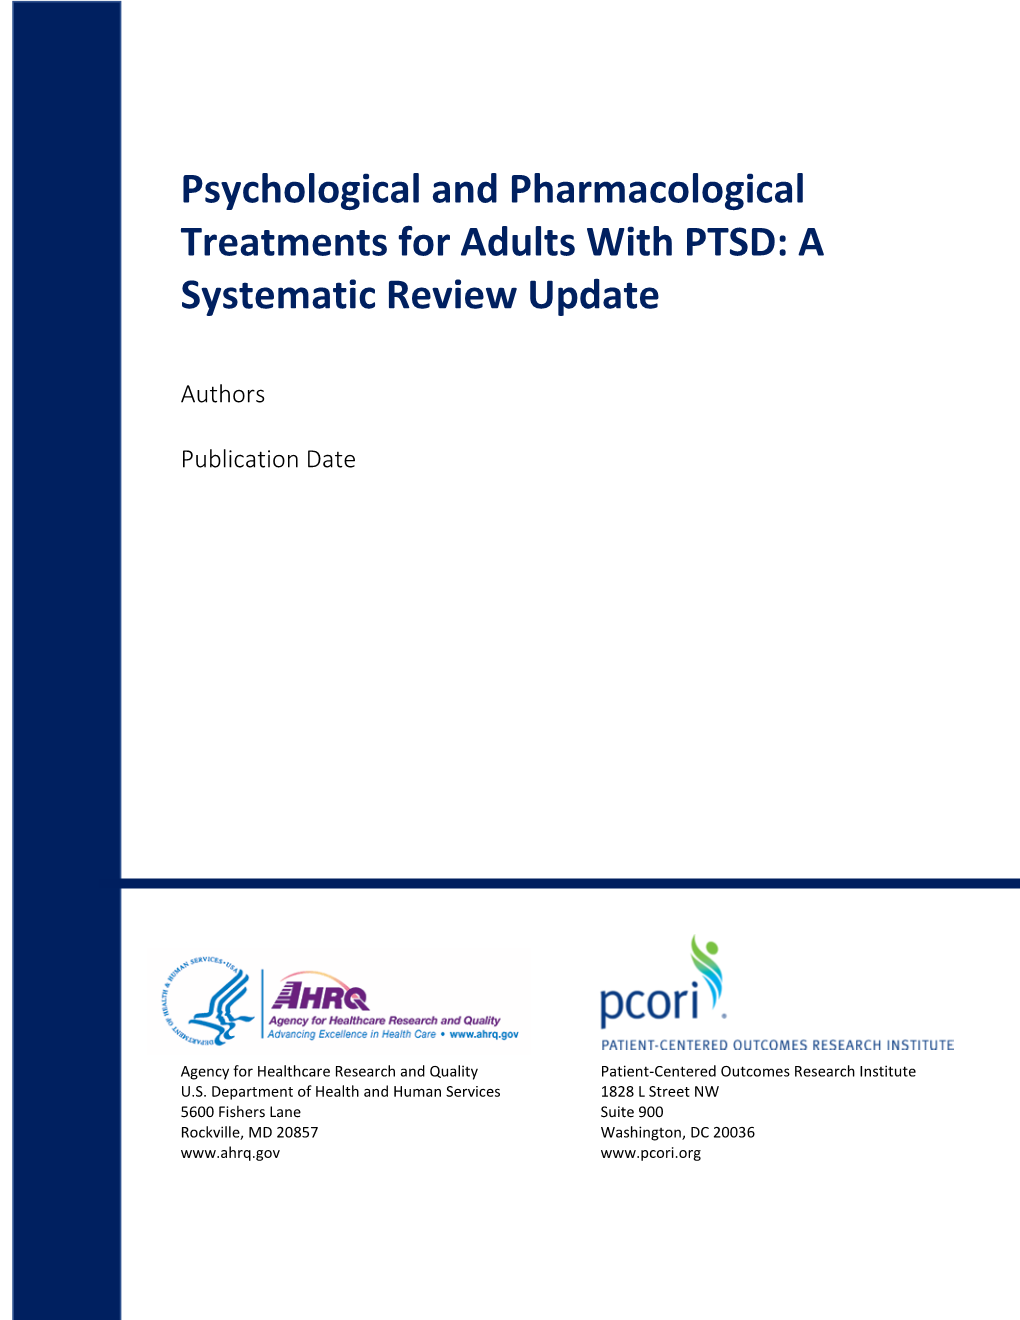 PTSD: a Systematic Review Update